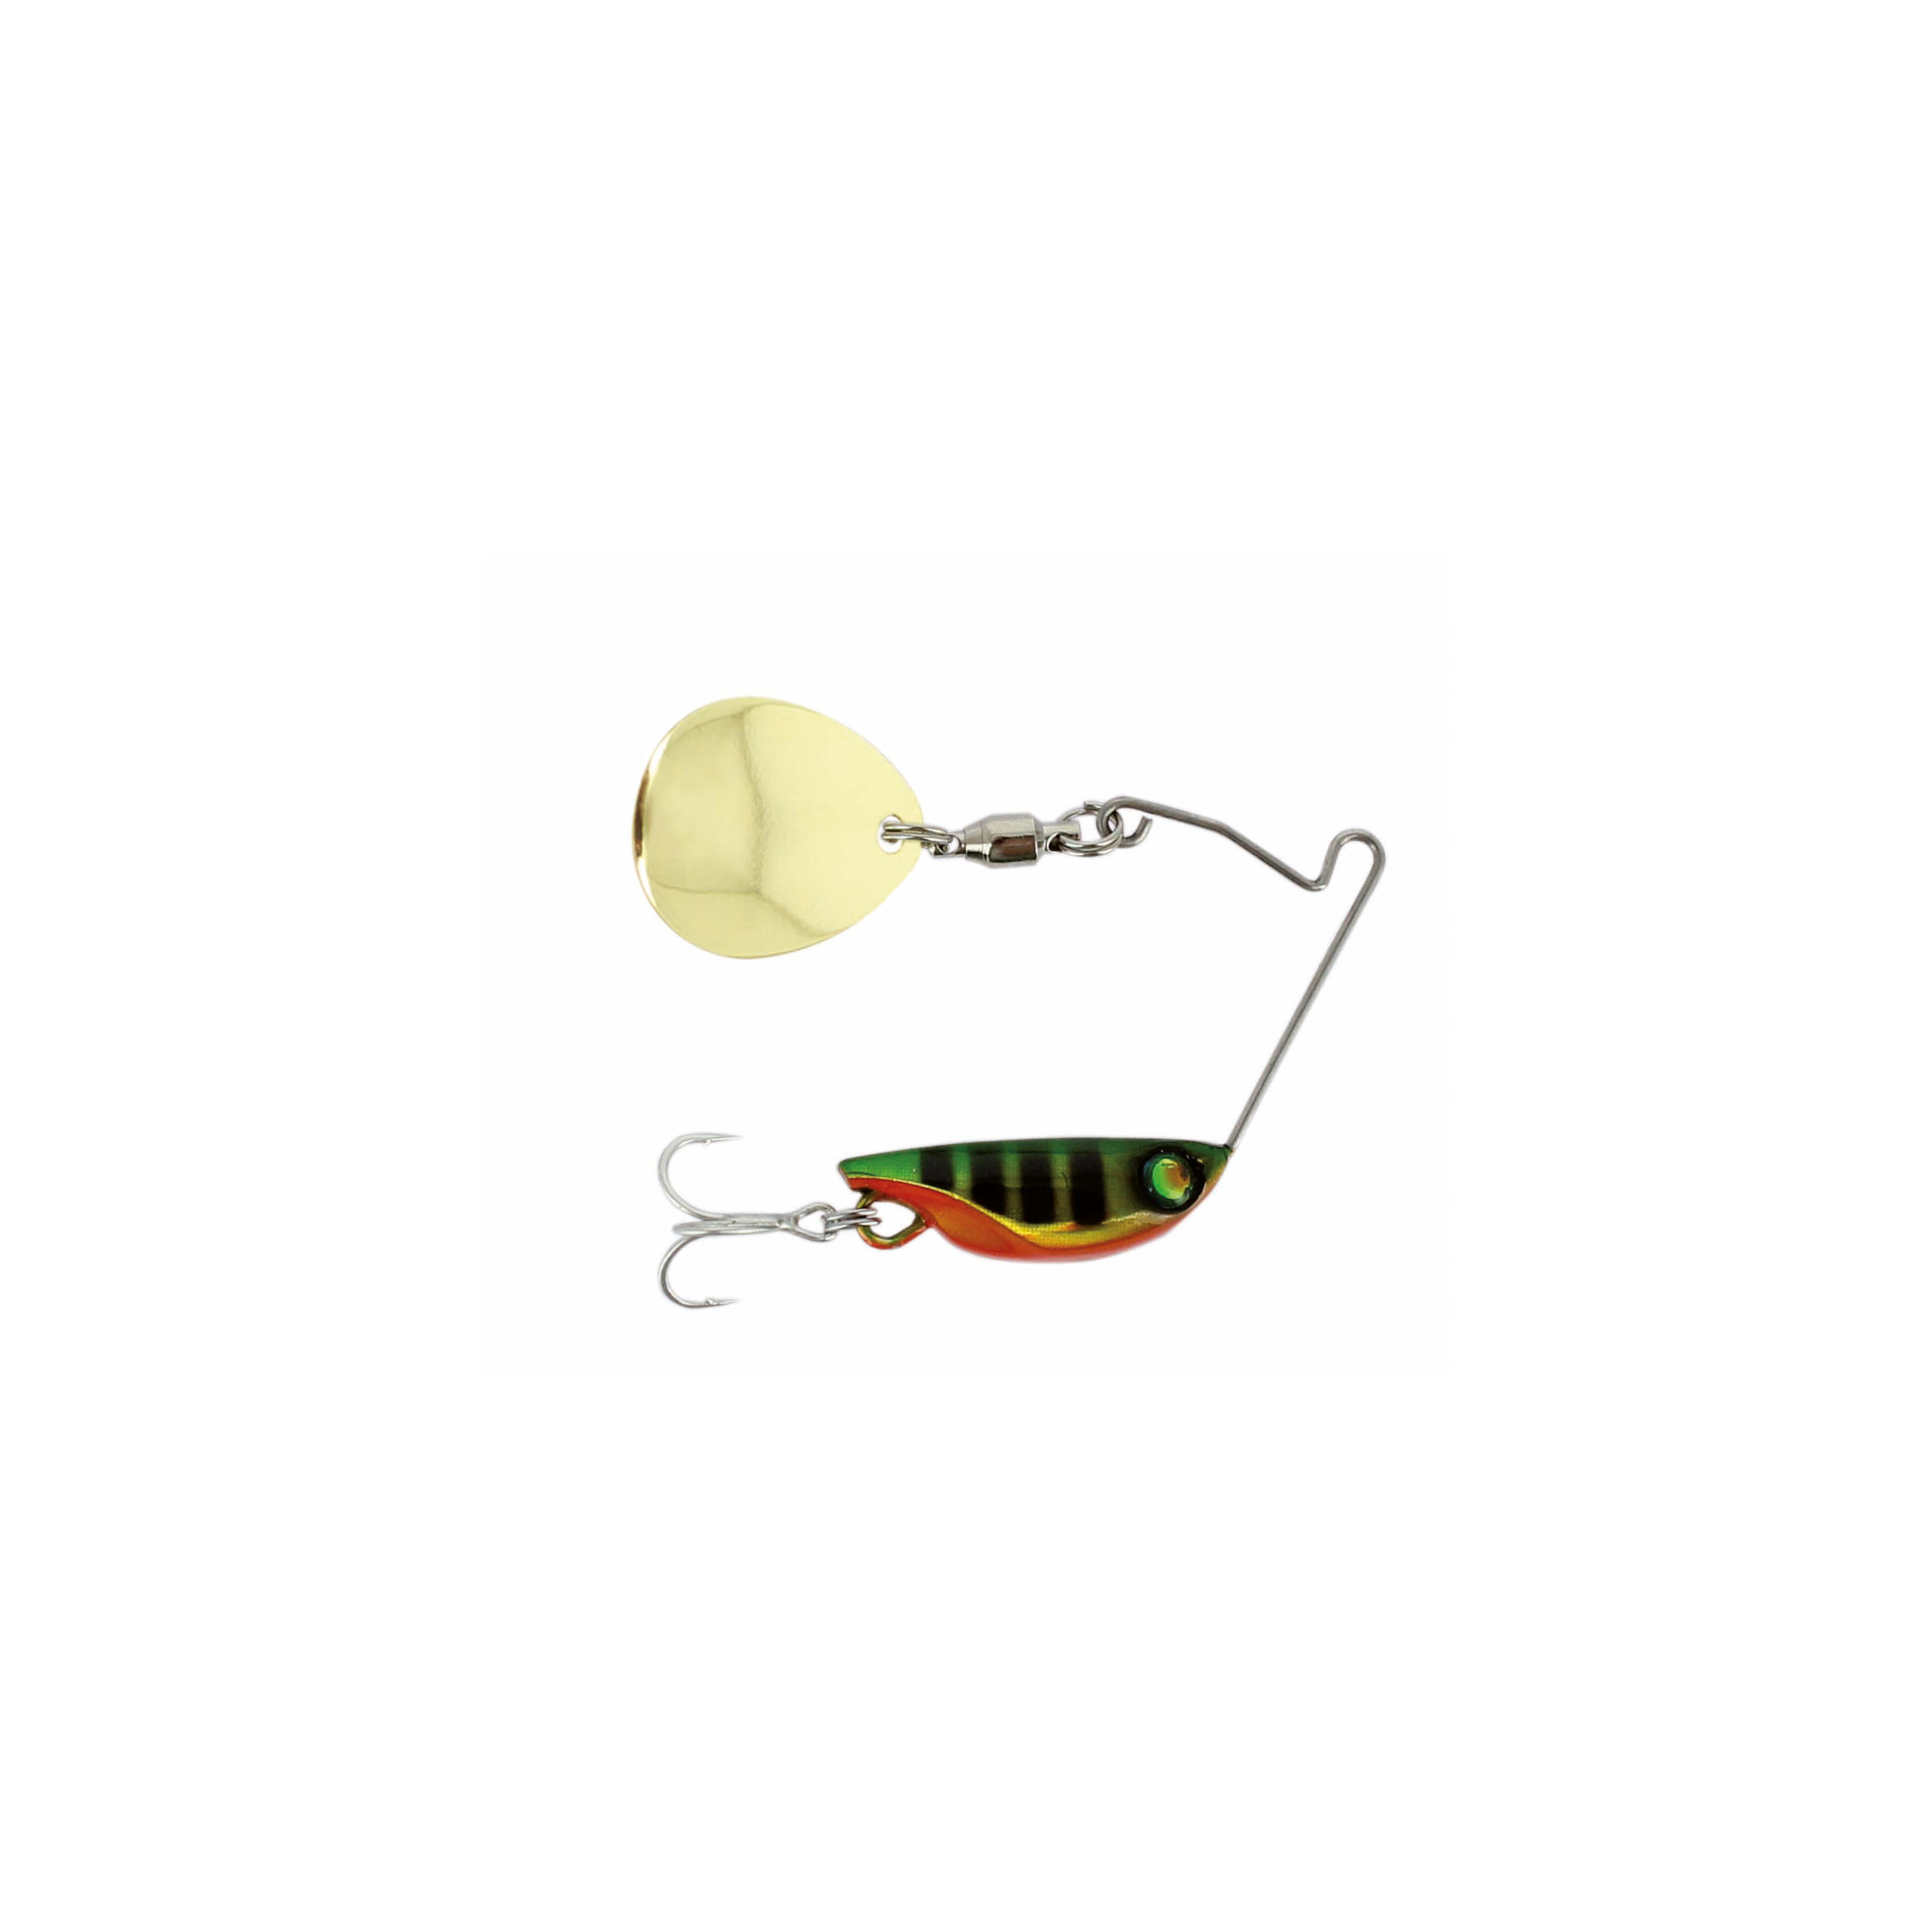 Perch Lure Fishing Spinner Microspinner Nano'x 6g Perch AUTAIN